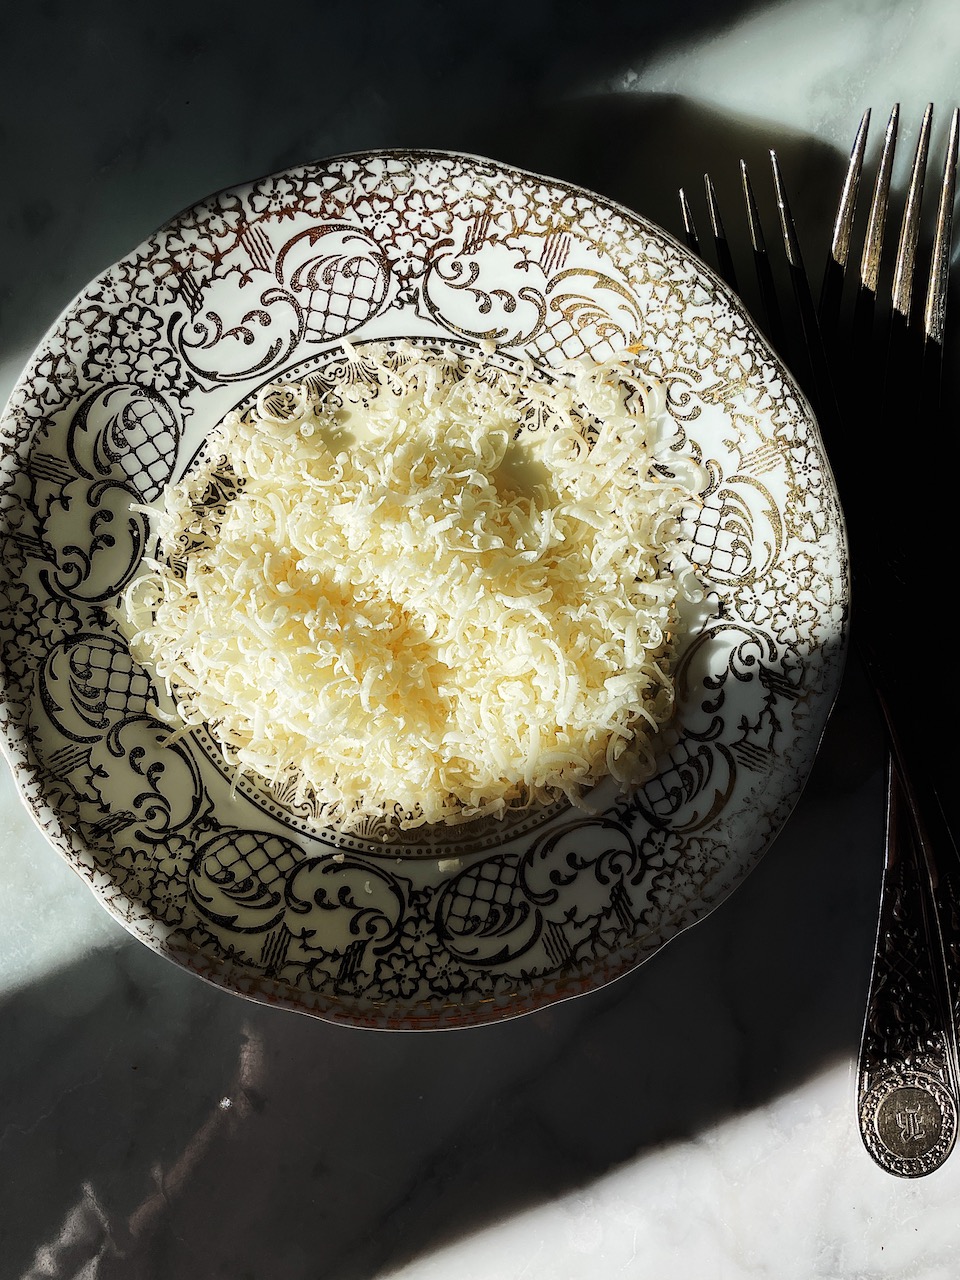 grated parmesan cheese 36 months